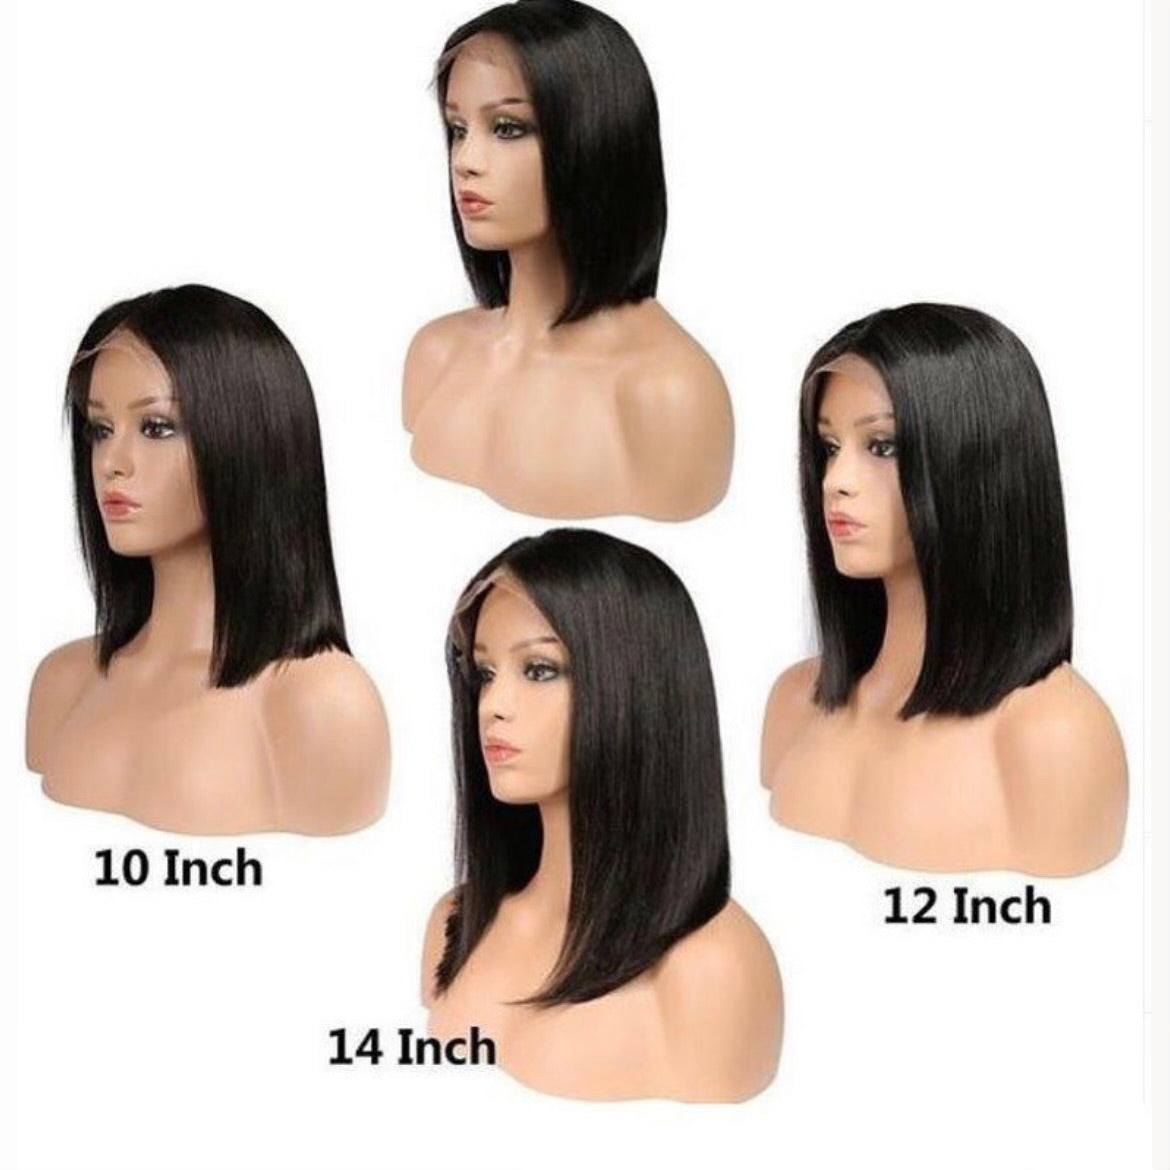 STRAIGHT WIGS AND BODY WAVE WIGS